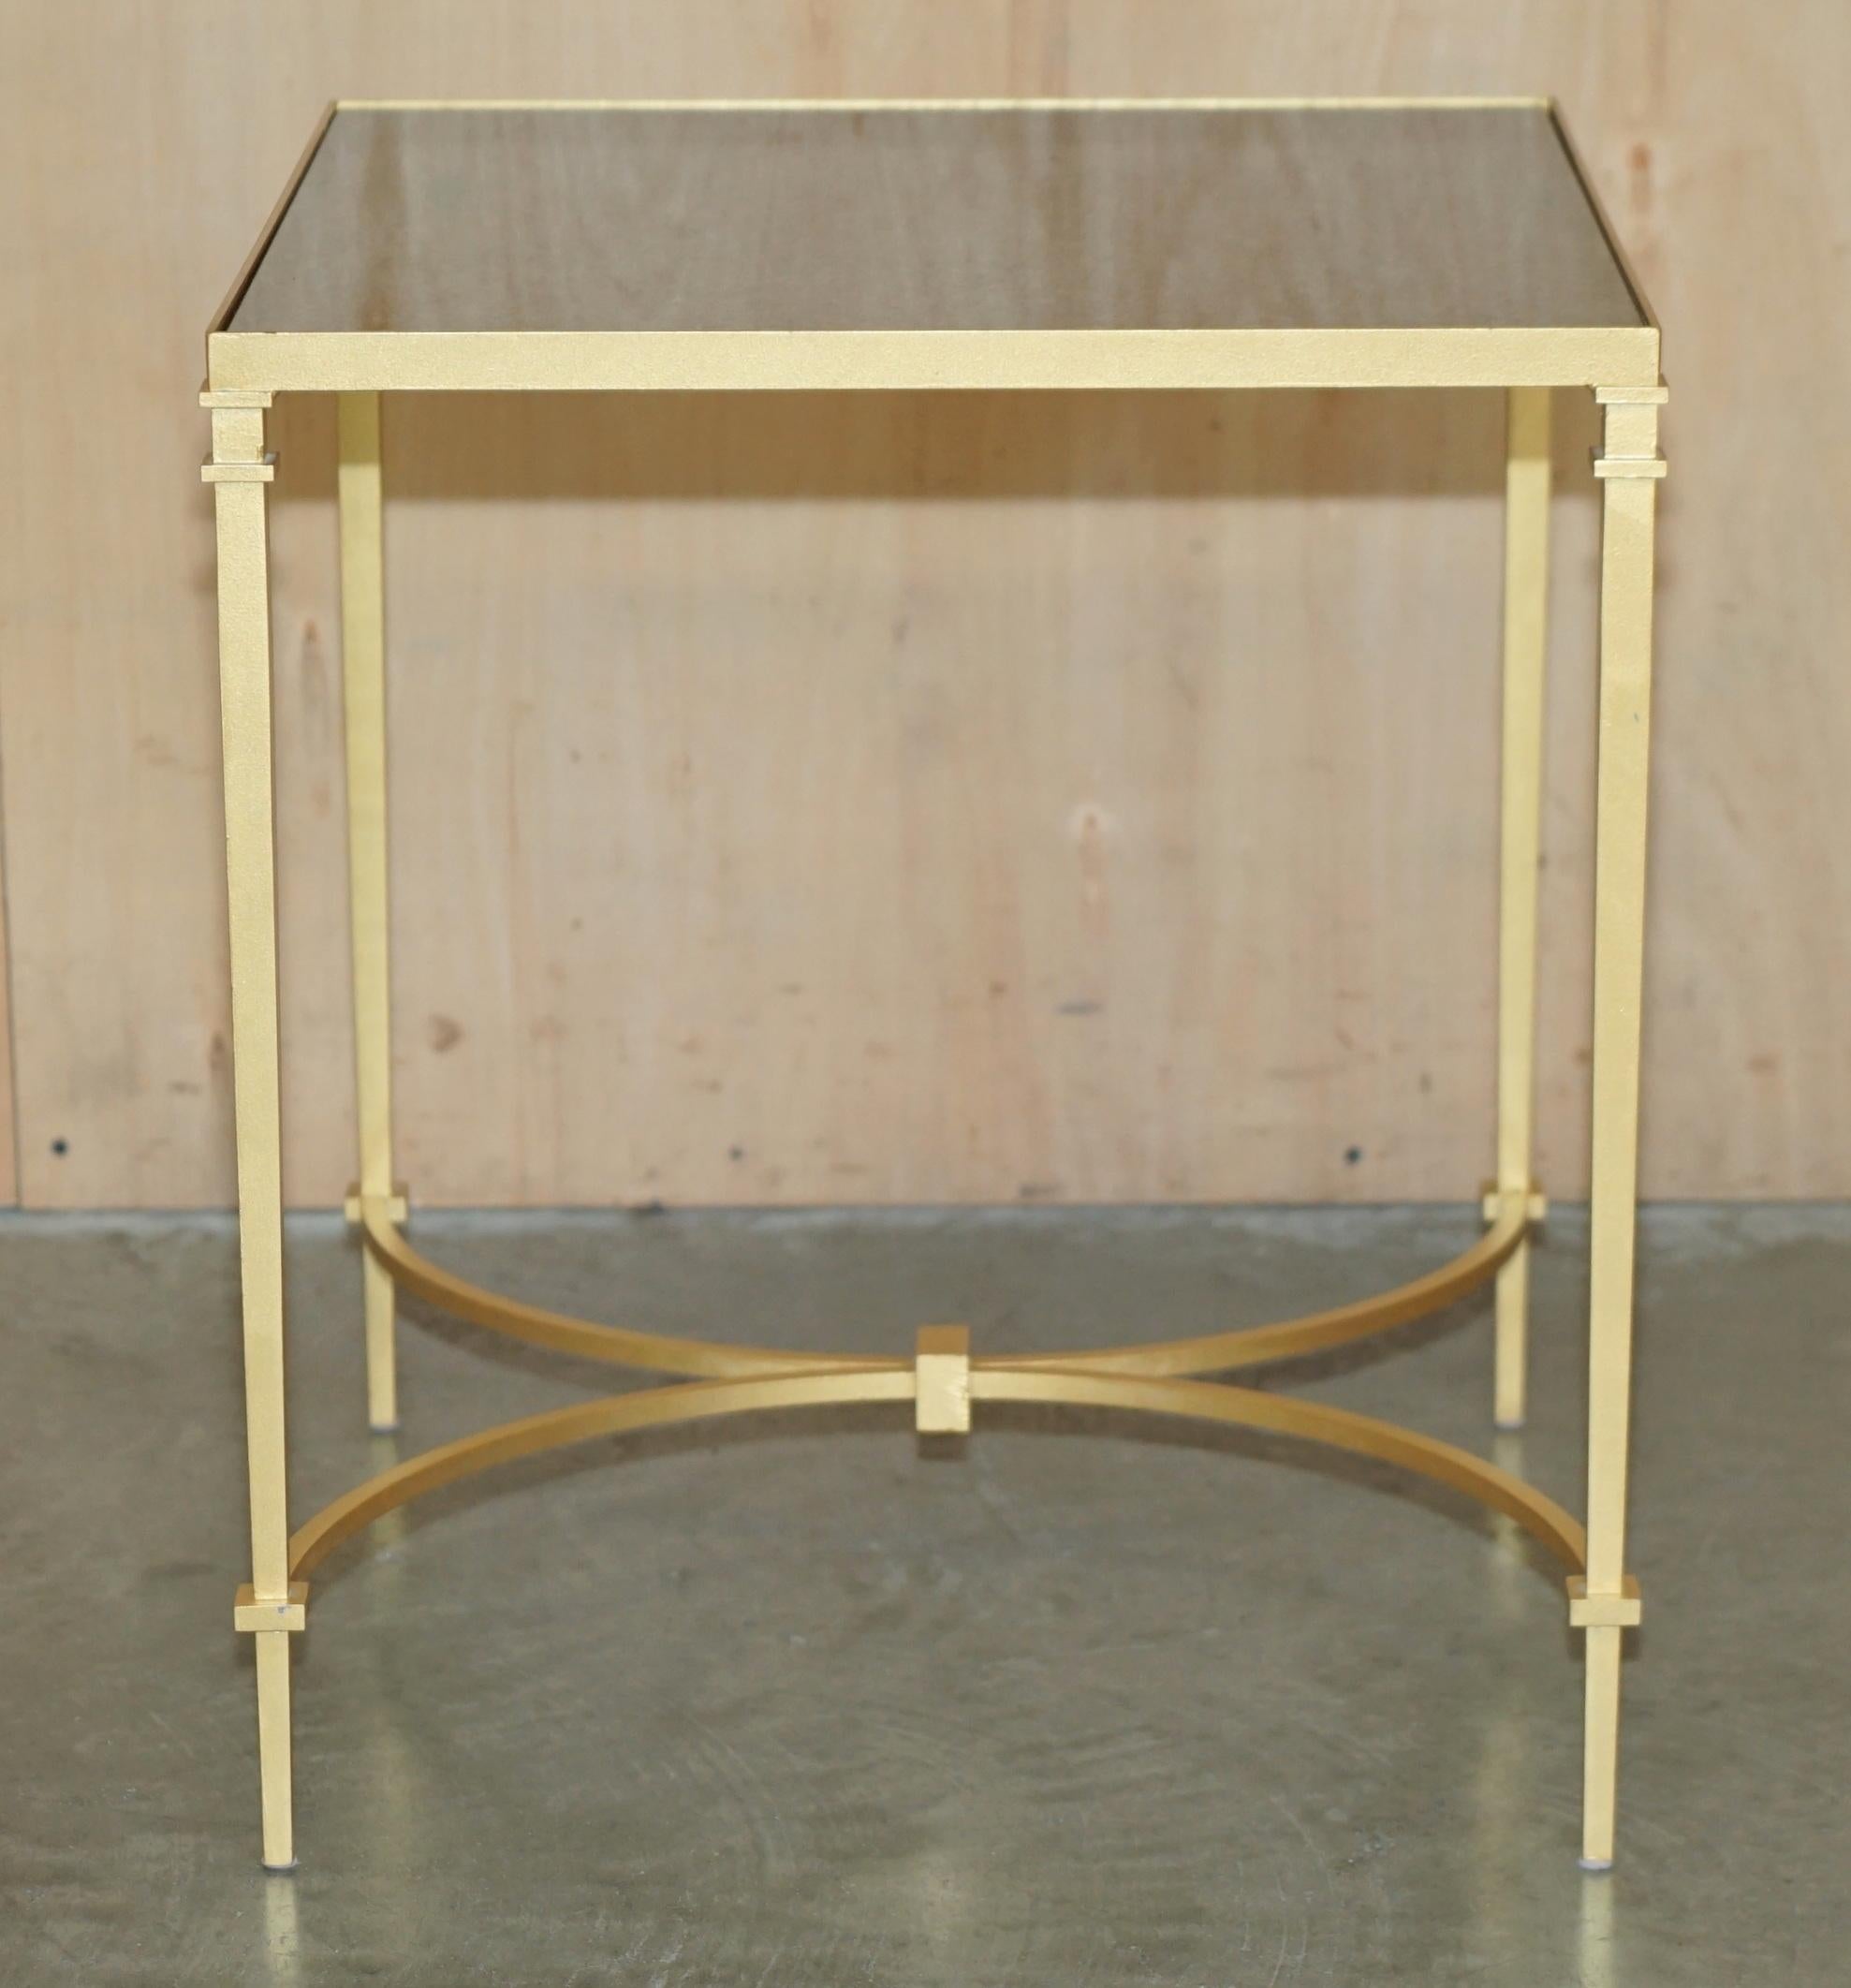 ELEGANT ViNTAGE BRASS AND ITALIAN MARBLE SIDE TABLE WITH ORNATELY CASTS BASE For Sale 10